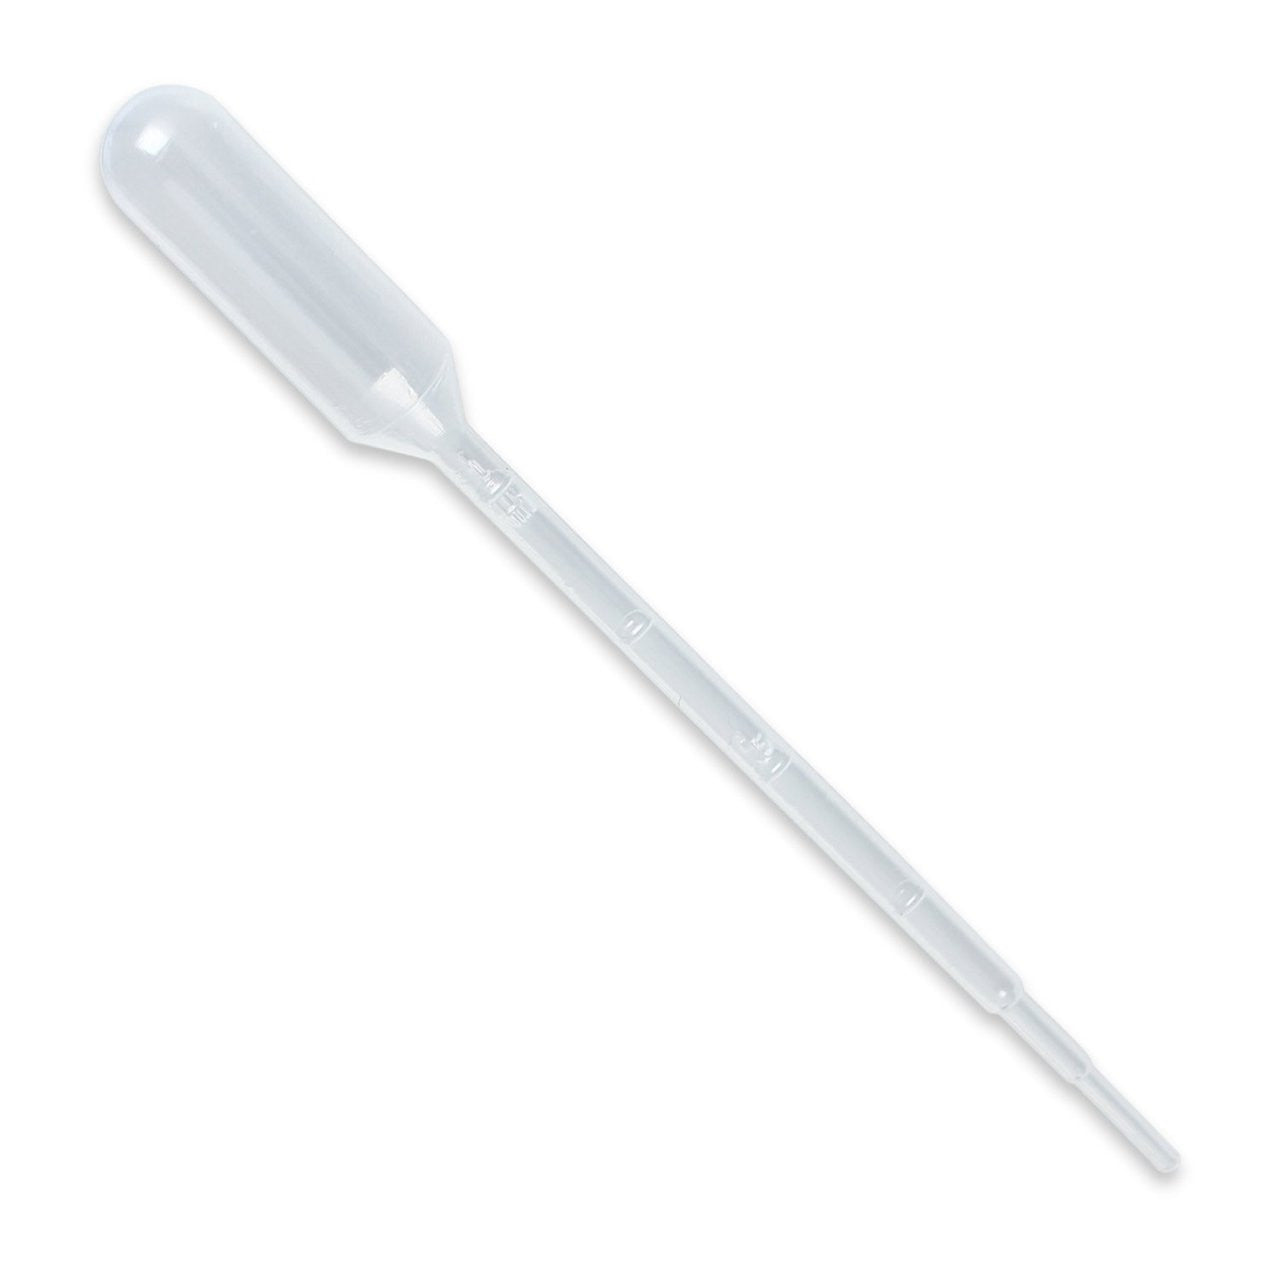 1/2 ml Plastic Disposable Pipette Droppers 25 Pack For Essential Oils